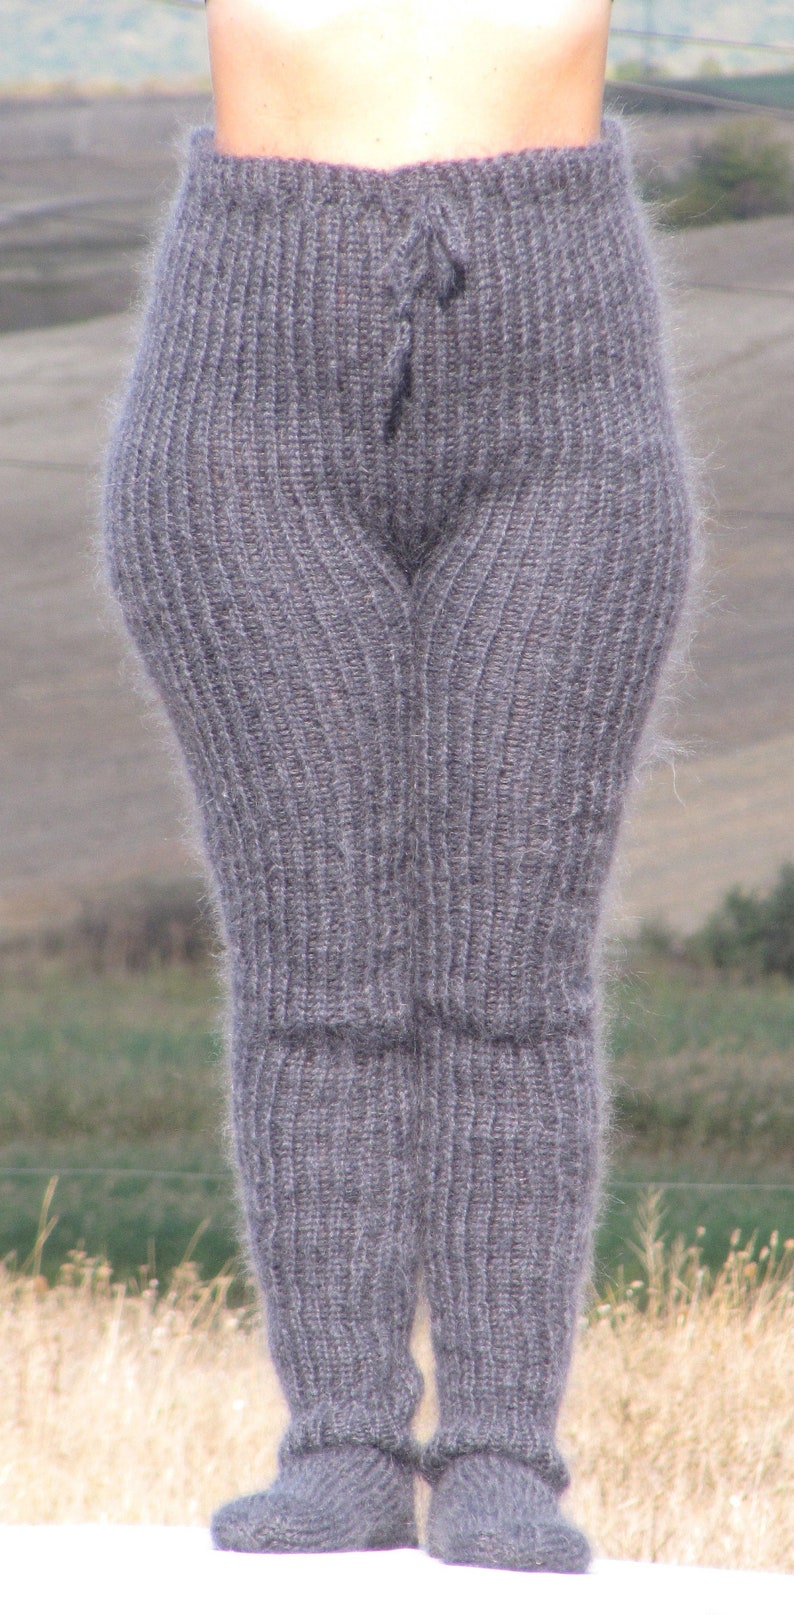 MOHAIR Dark Grey Pants With Socks Trousers With Socks Handknit - Etsy